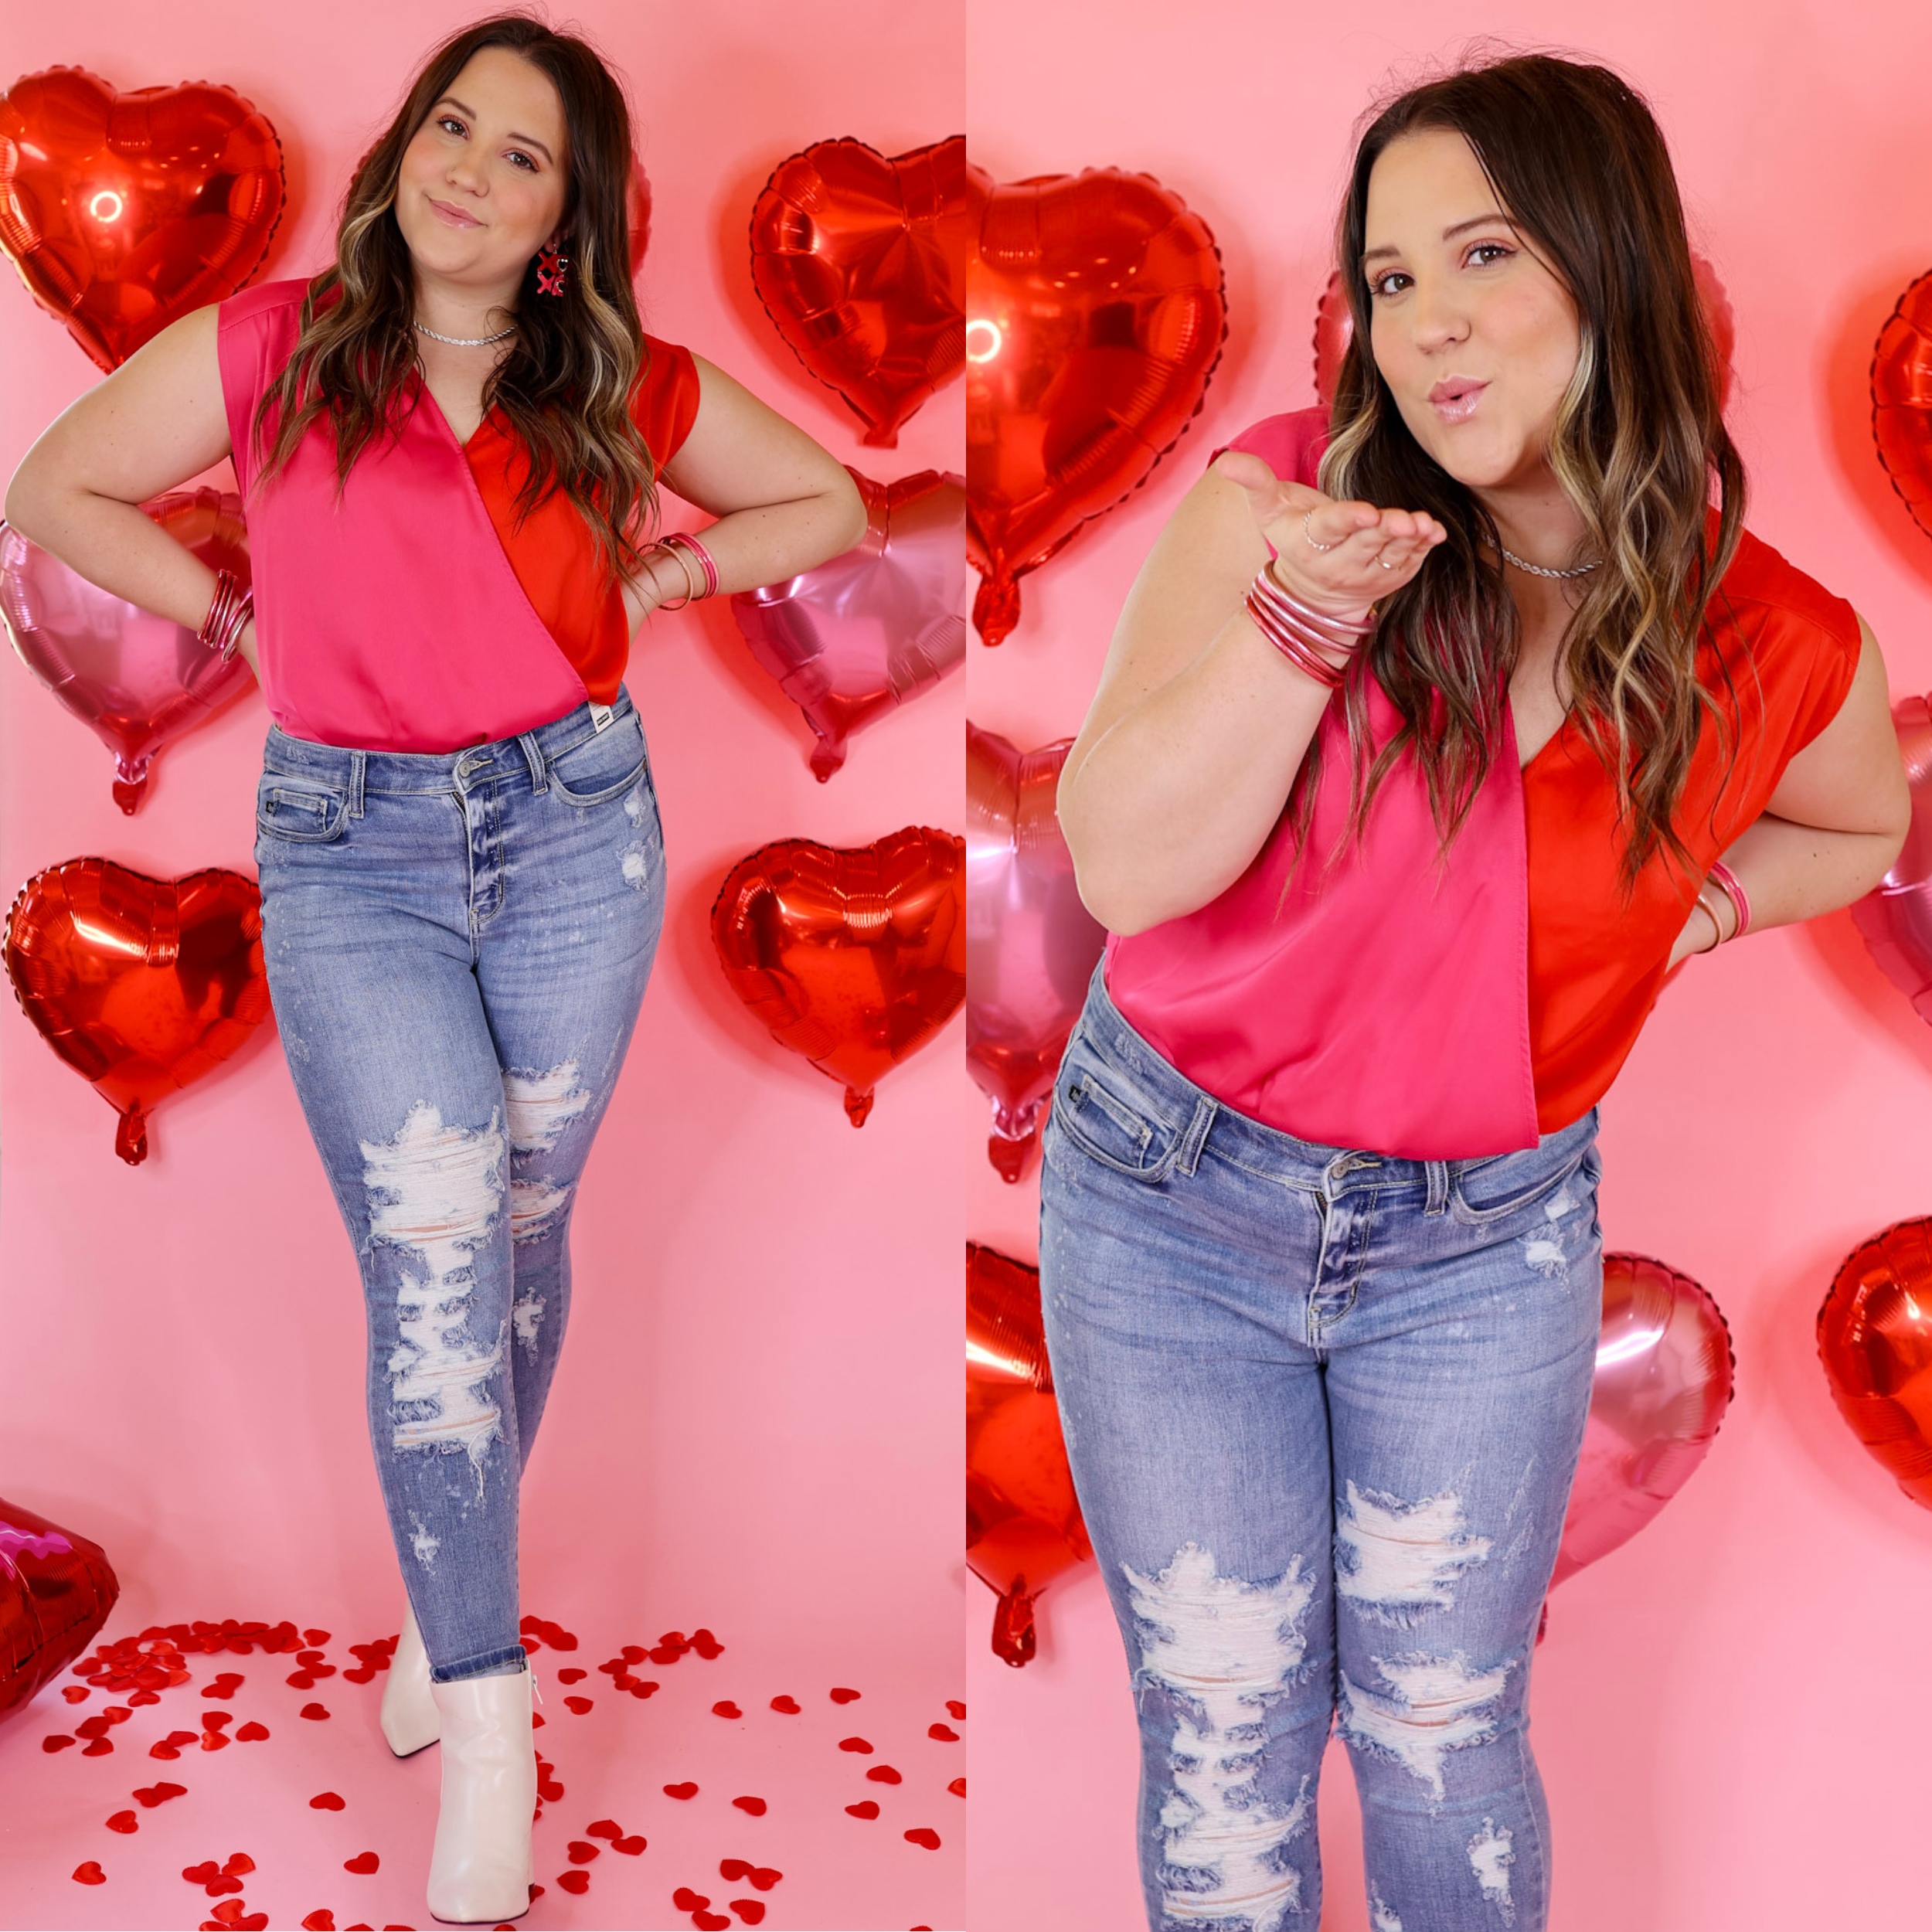 Model is wearing a sleeveless, v neck, top in pink and red. Model has this top paired with skinny jeans, white booties, and pink and silver jewelry. Background is light pink with red balloons.